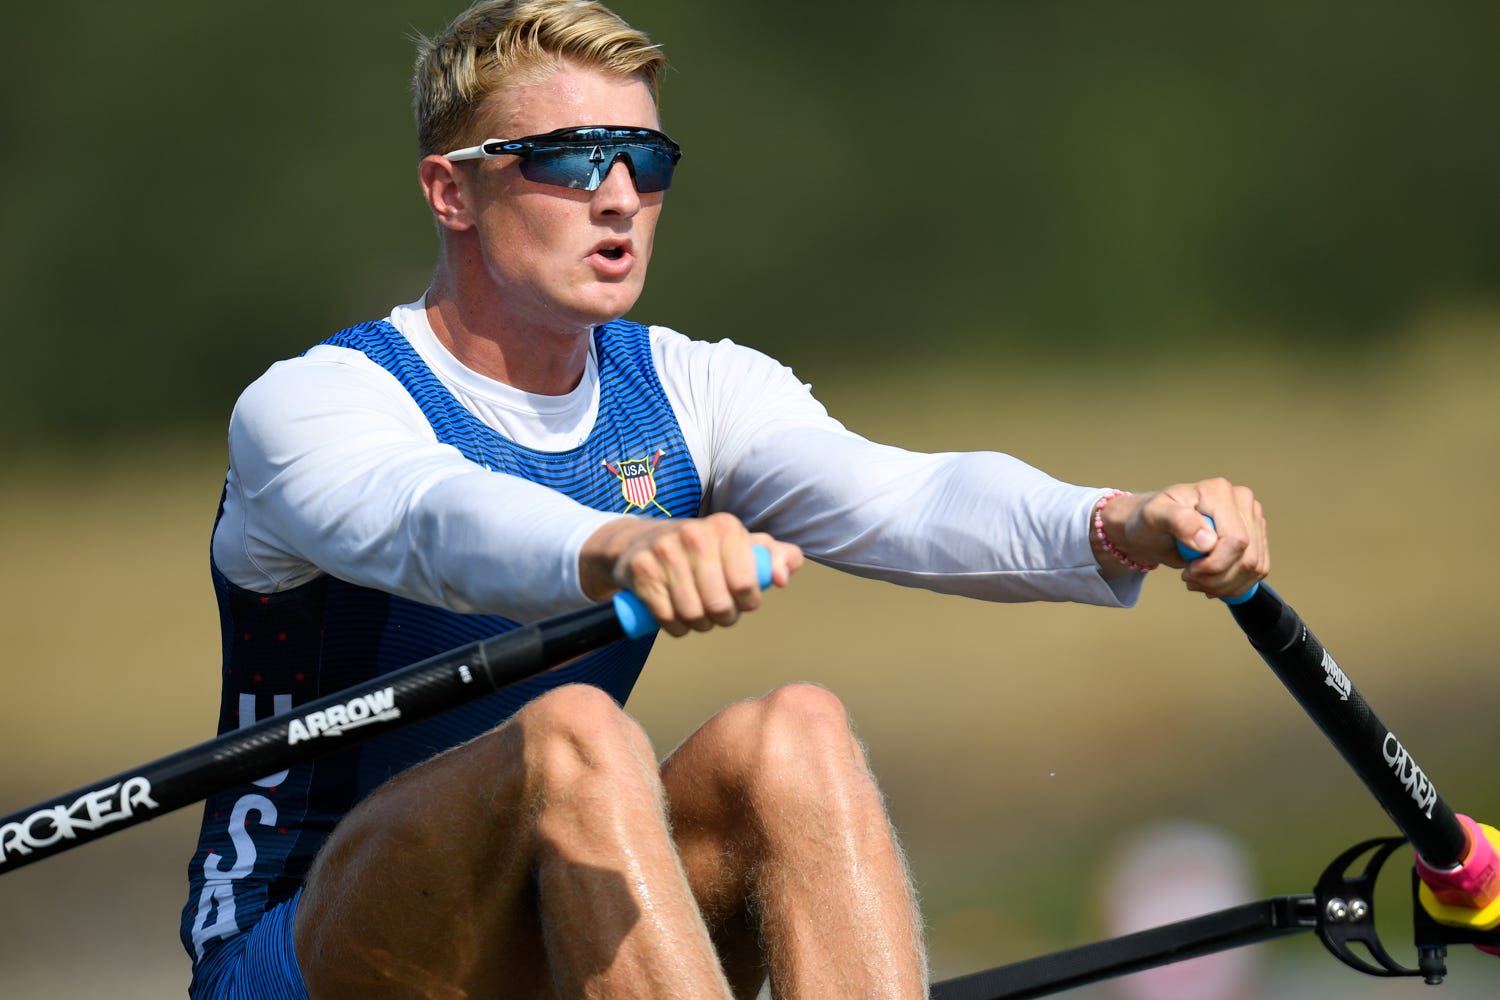 On final opportunity, Sarasota rower Clark Dean qualifies for Paris Olympics in Men's Eight